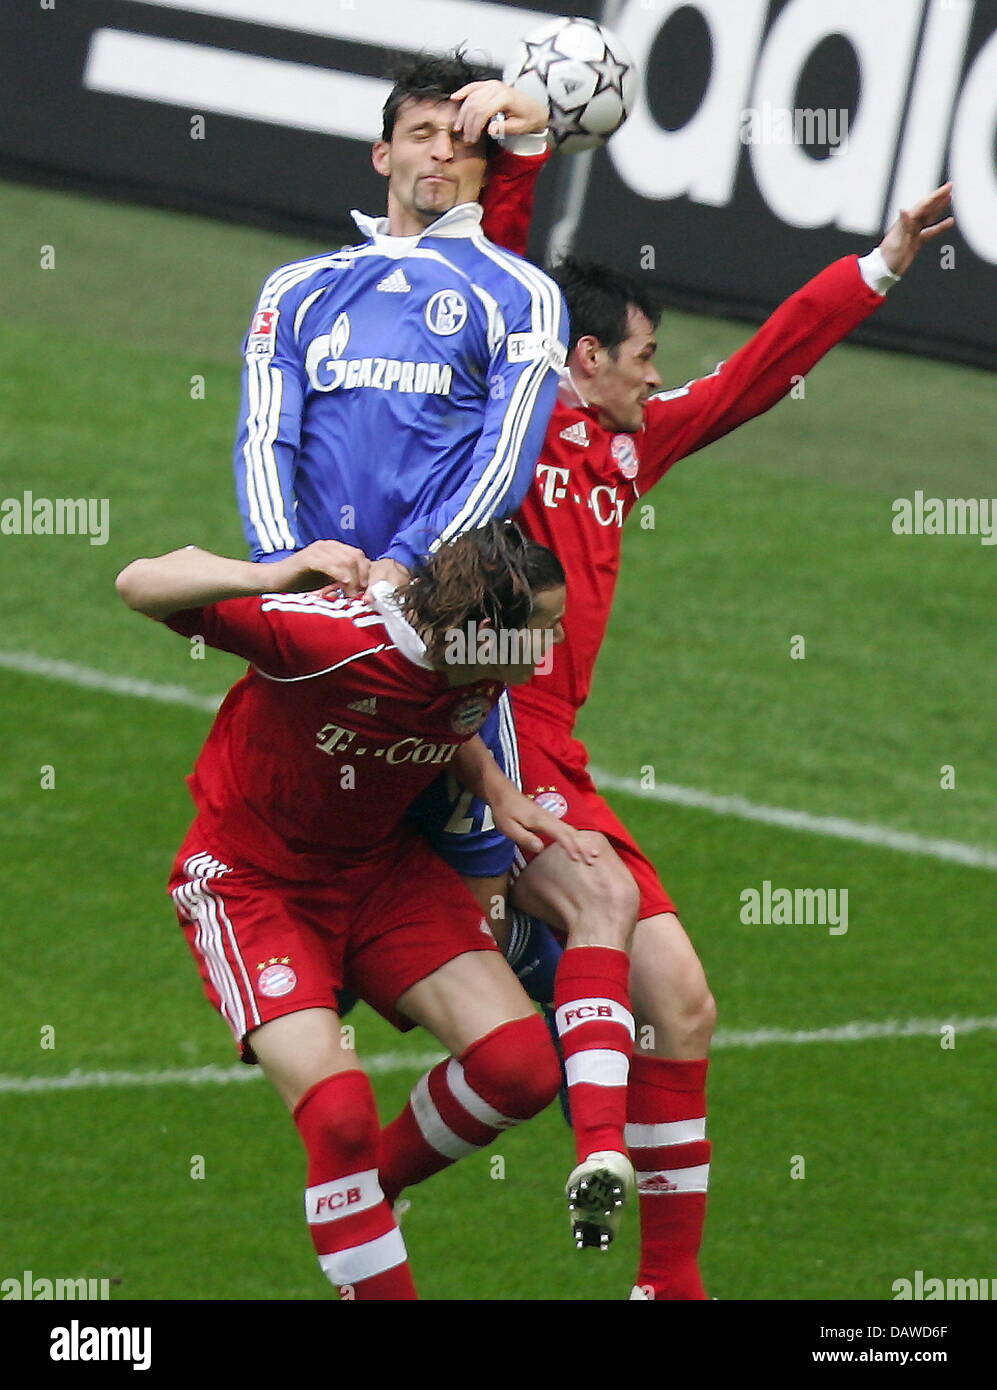 Bayern Munich's Willy Sagnol (R) and 1860 Munich's Lars Bender (L) shown in  action during the soccer friendly FC Bayern Munich vs TSV 1860 Munich at  Allianz-Arena in Munich, Germany, 26 January